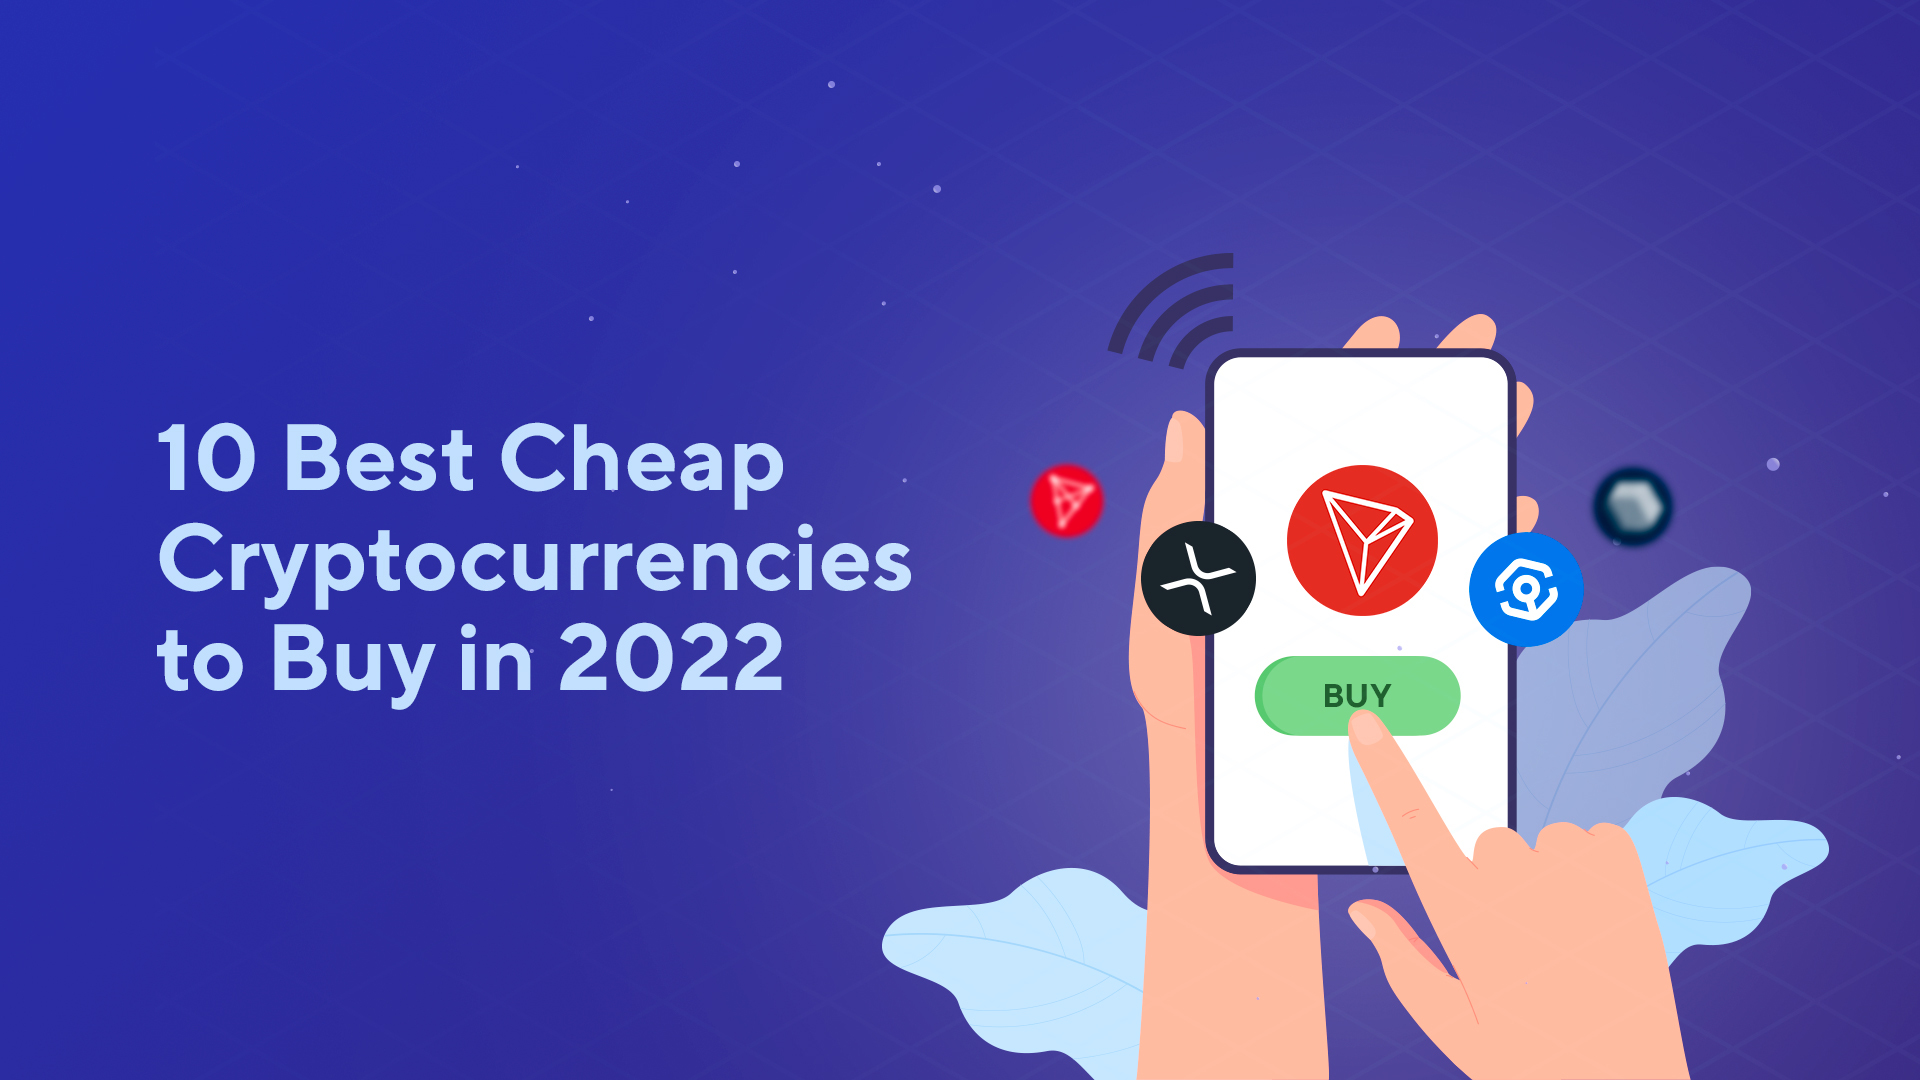 10 Best Cheap Cryptocurrencies to Buy in 2022